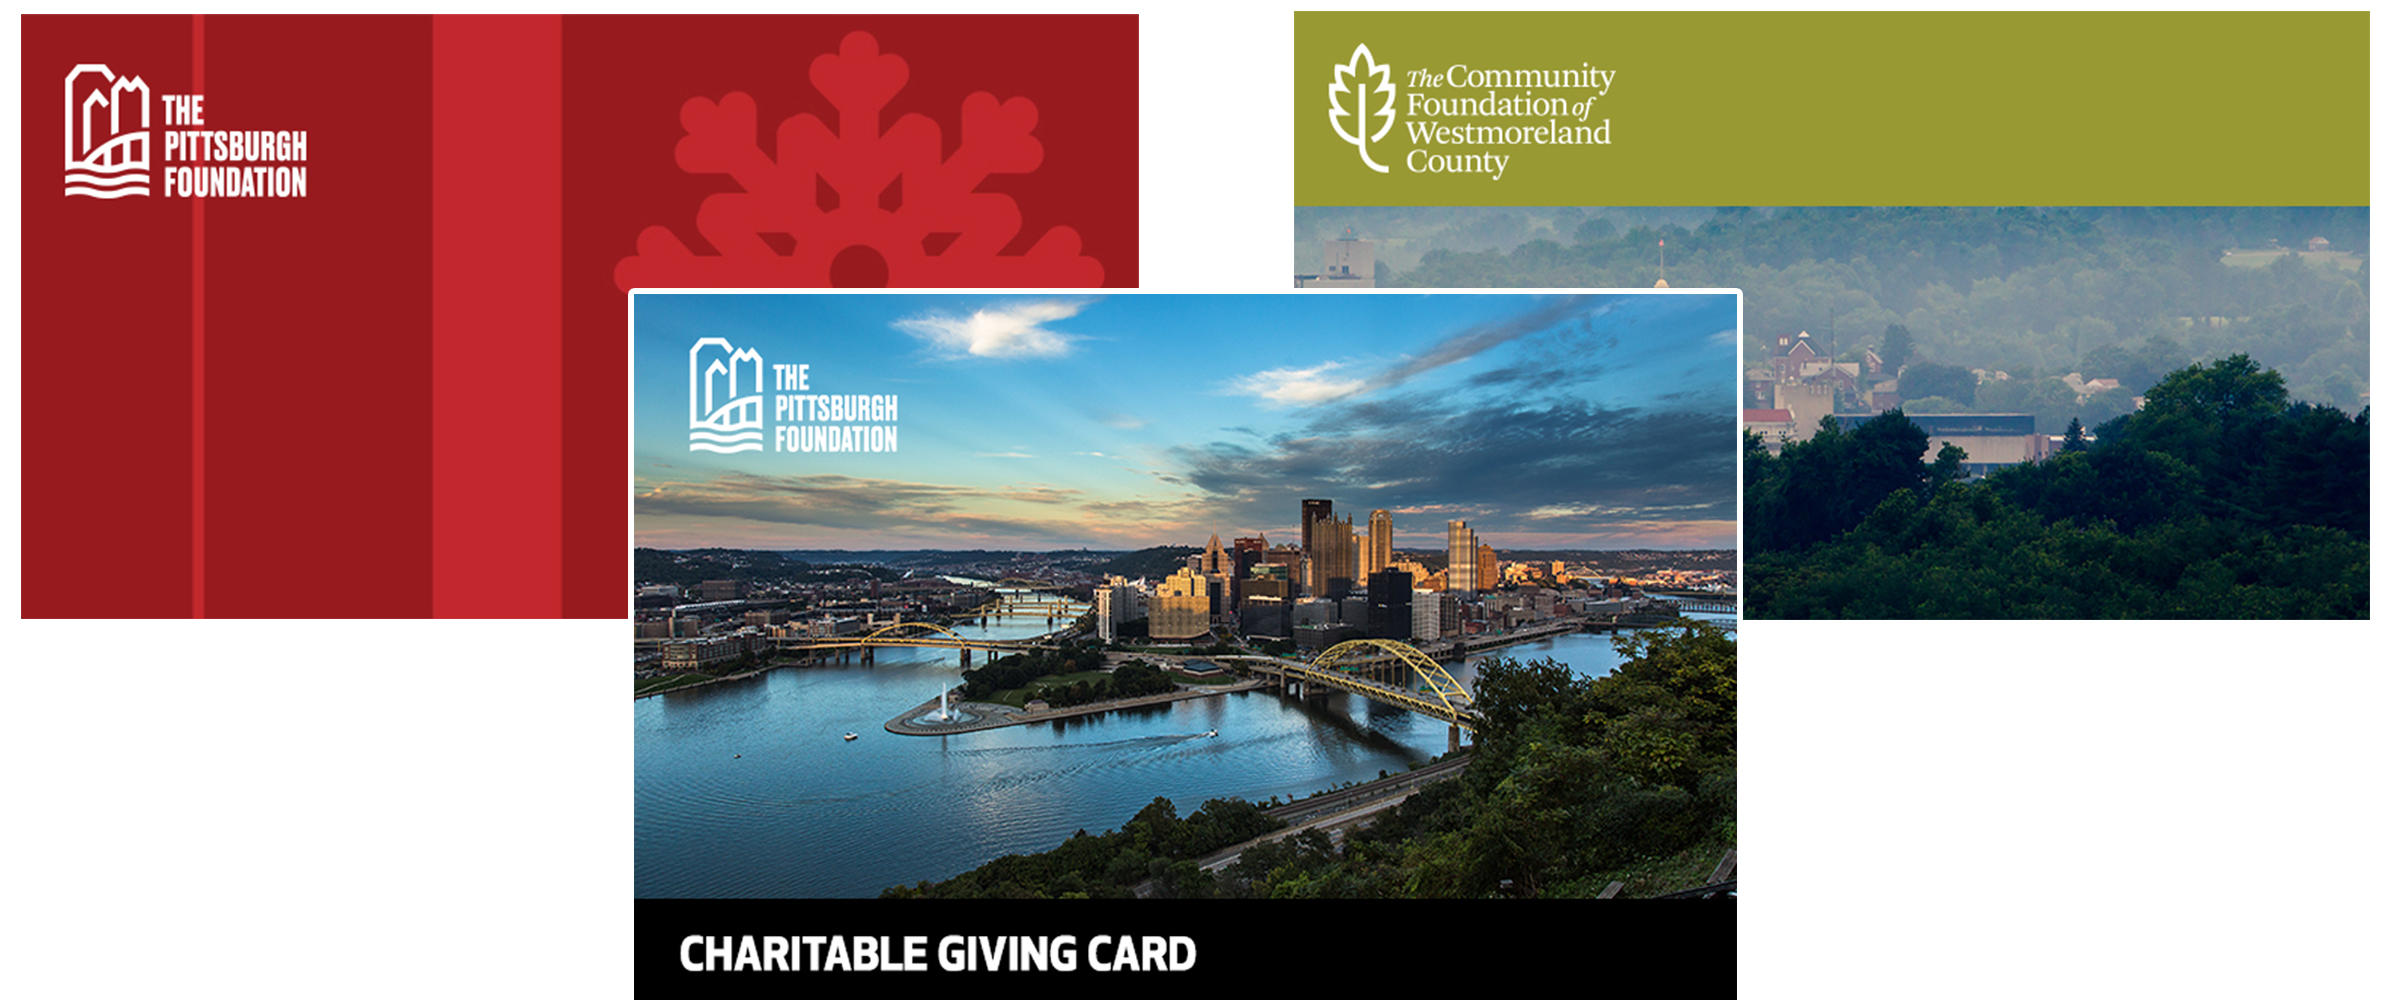 Charitable Giving Cards are available in three designs and in any denomination over $25.